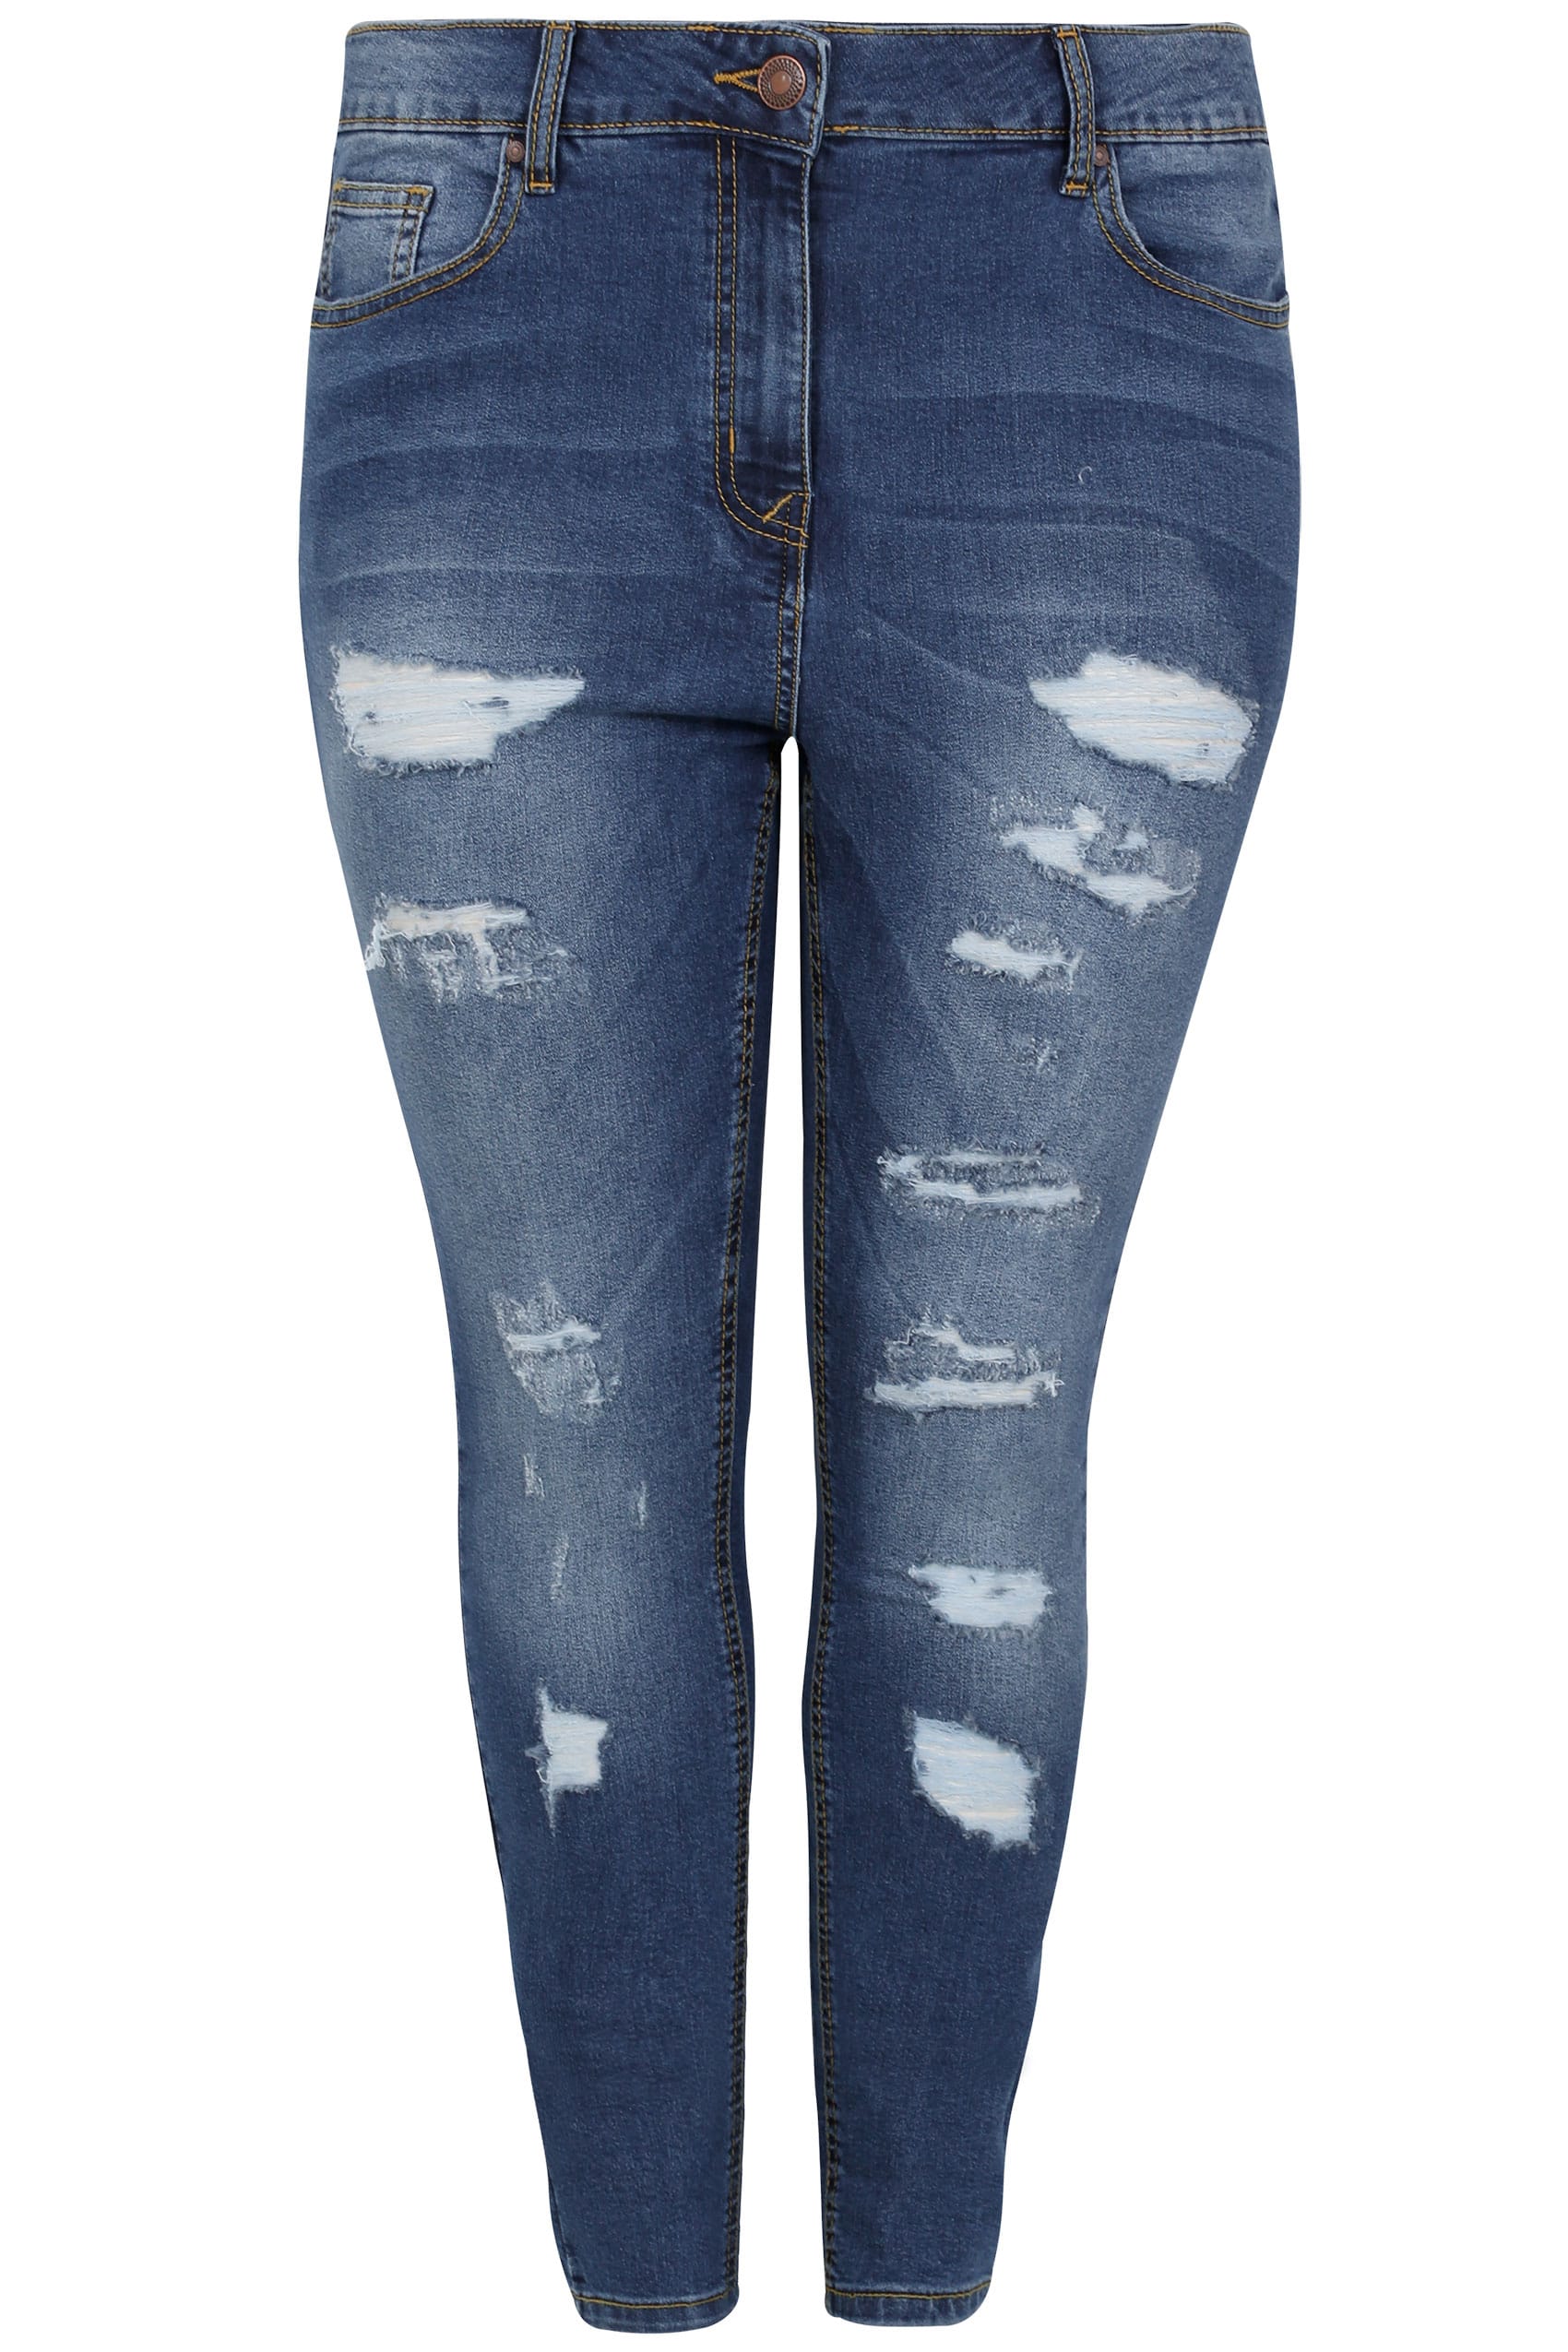 Limited Collection Blue Washed Ripped Skinny Jeans Plus